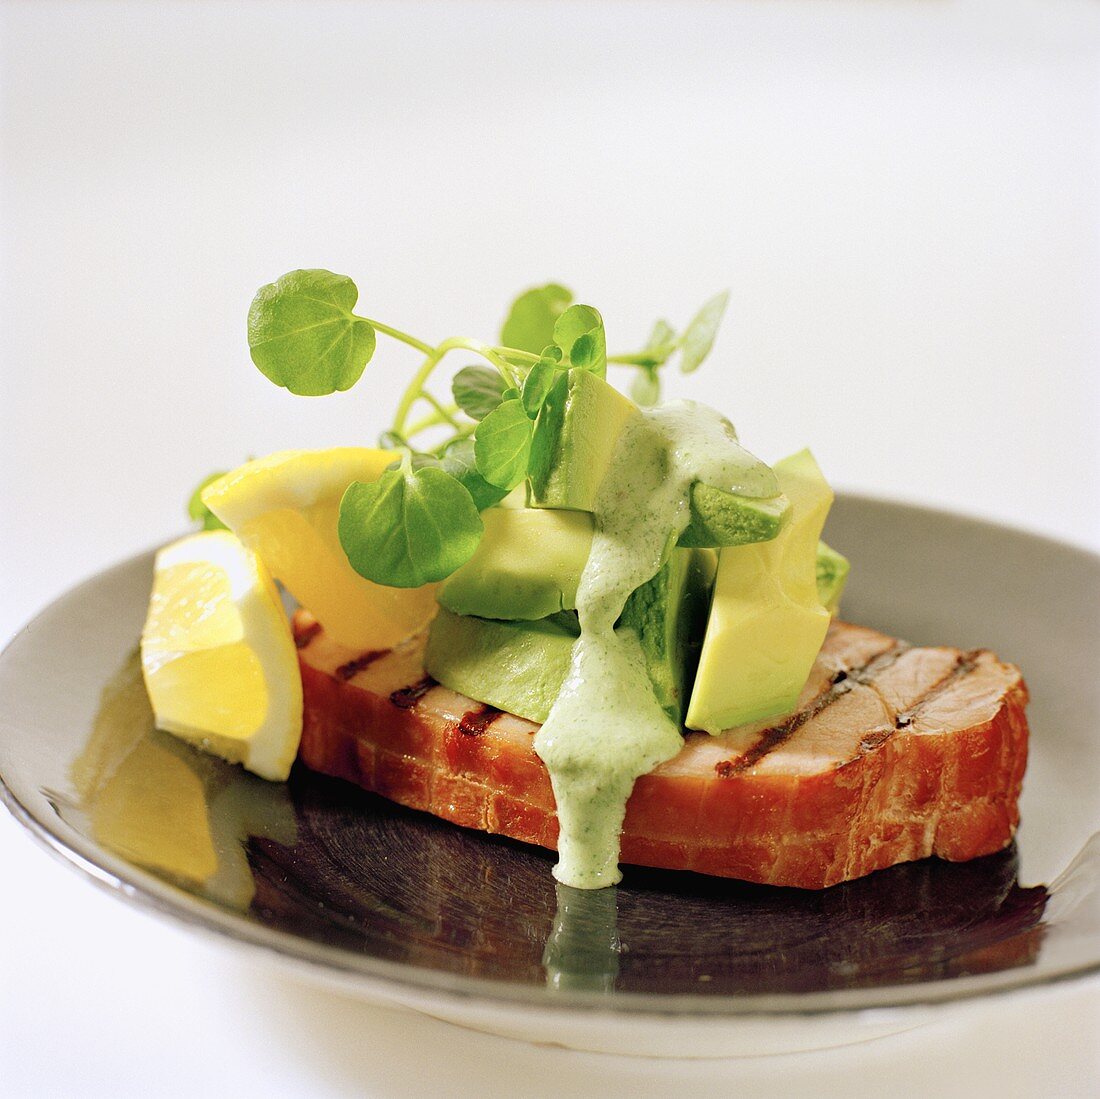 Smoked pickled loin of pork with avocado, cress and lemon